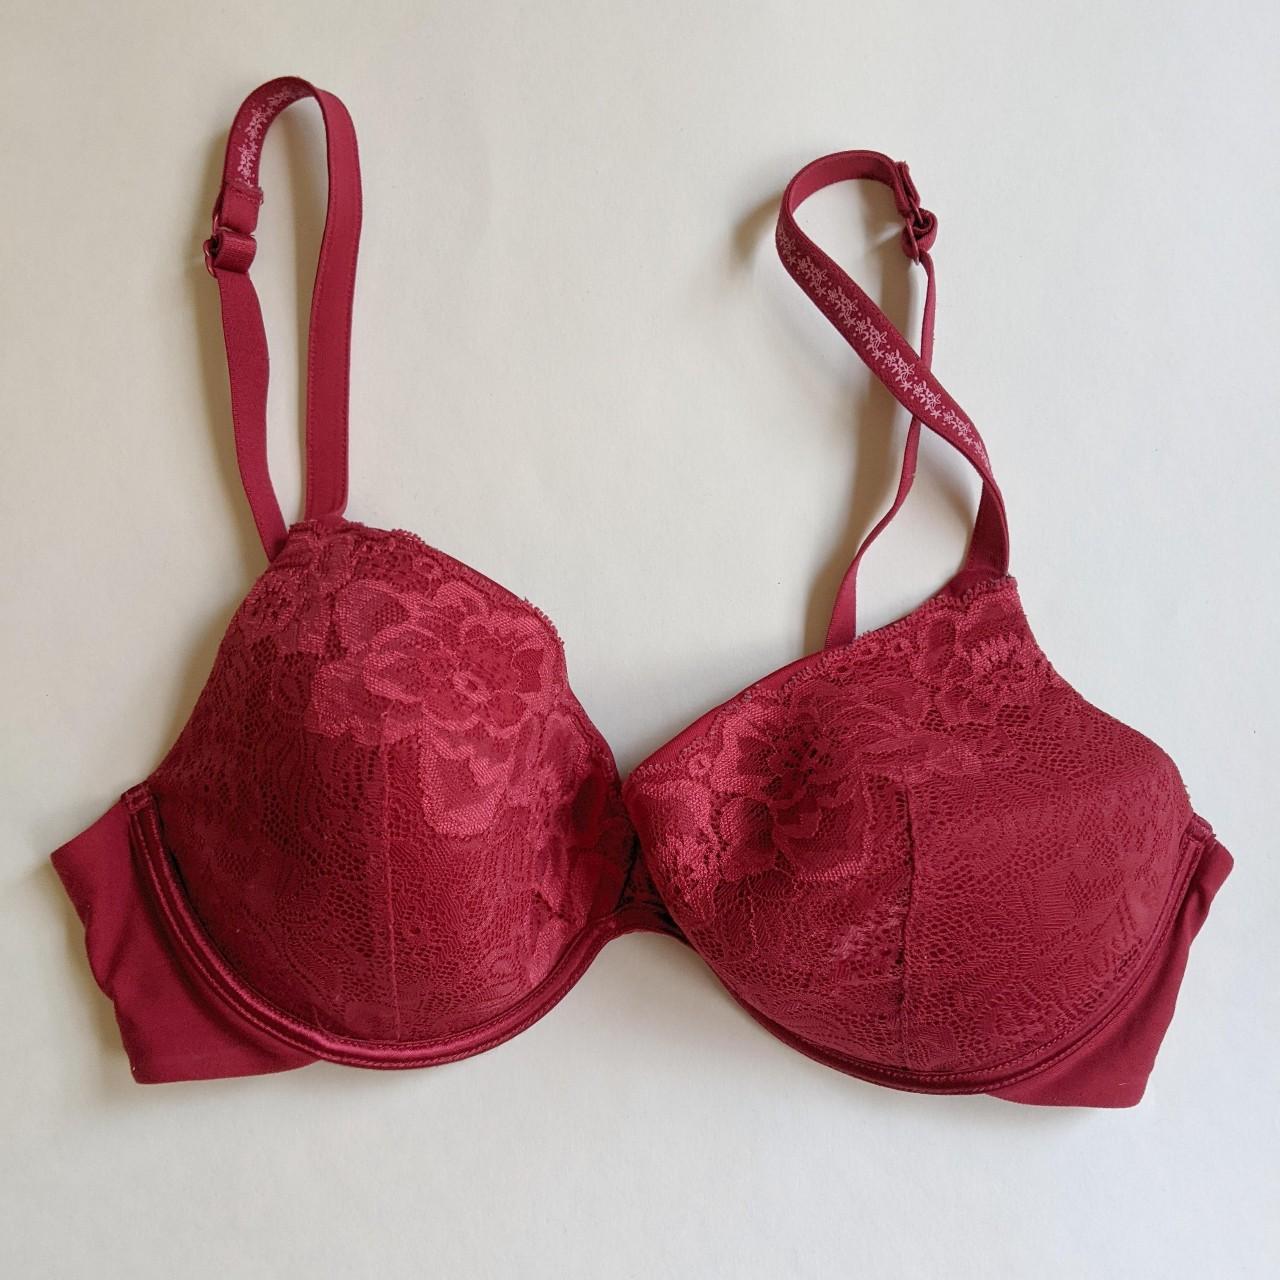 Product Image 1 - Red lace underwire bra 36C

Warner's